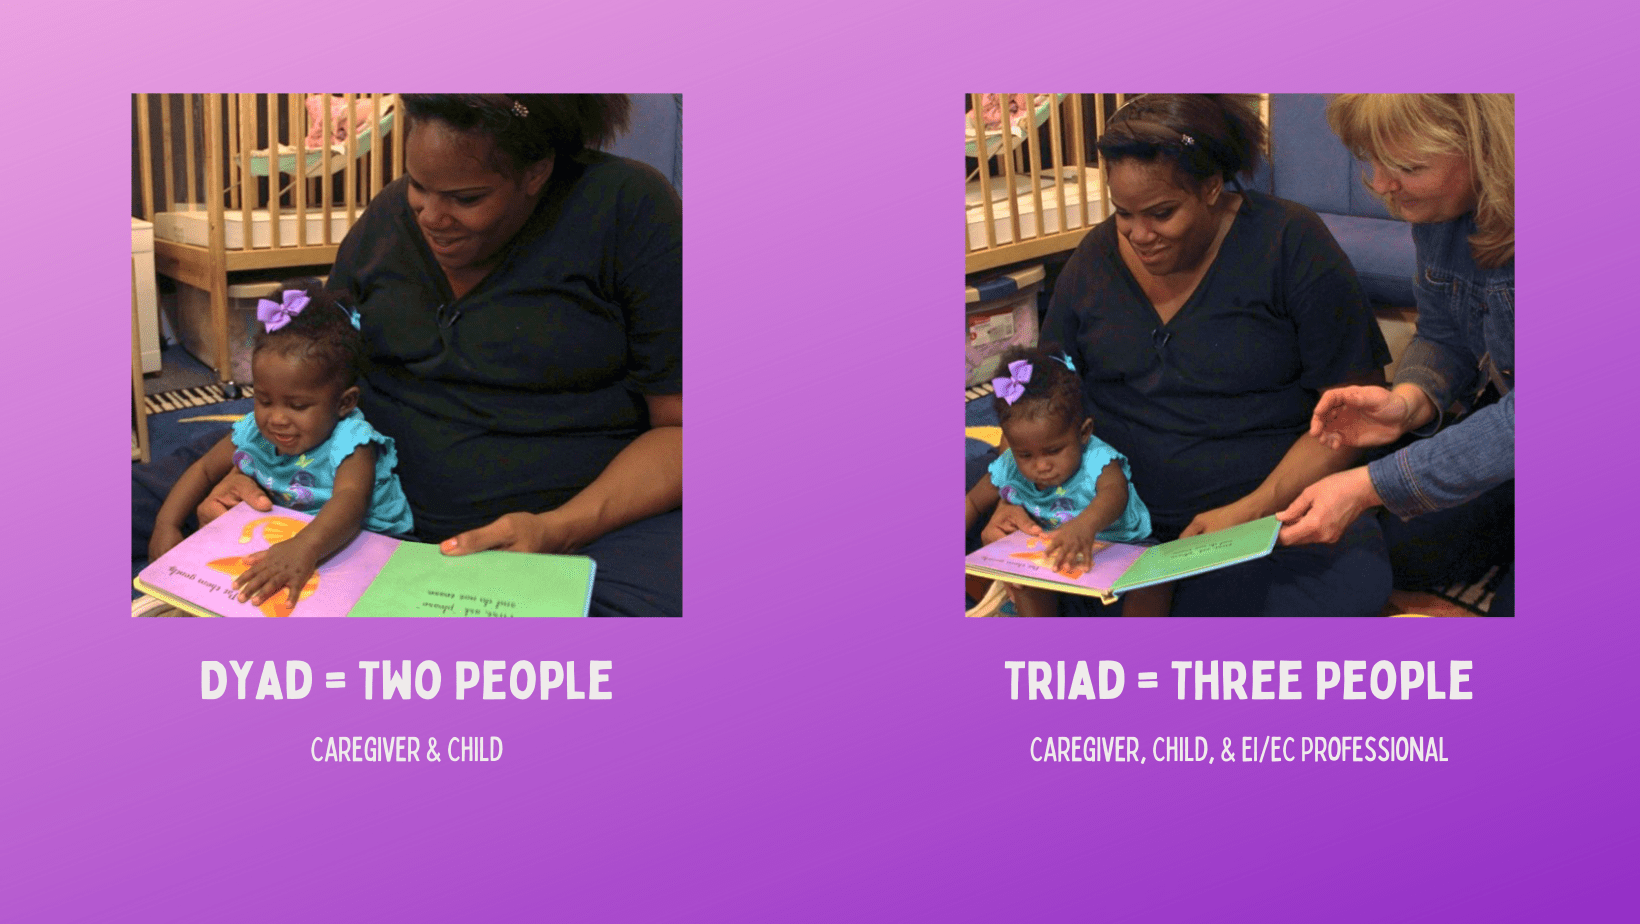 dyad is mom and child, triad is mom and child and caregiver